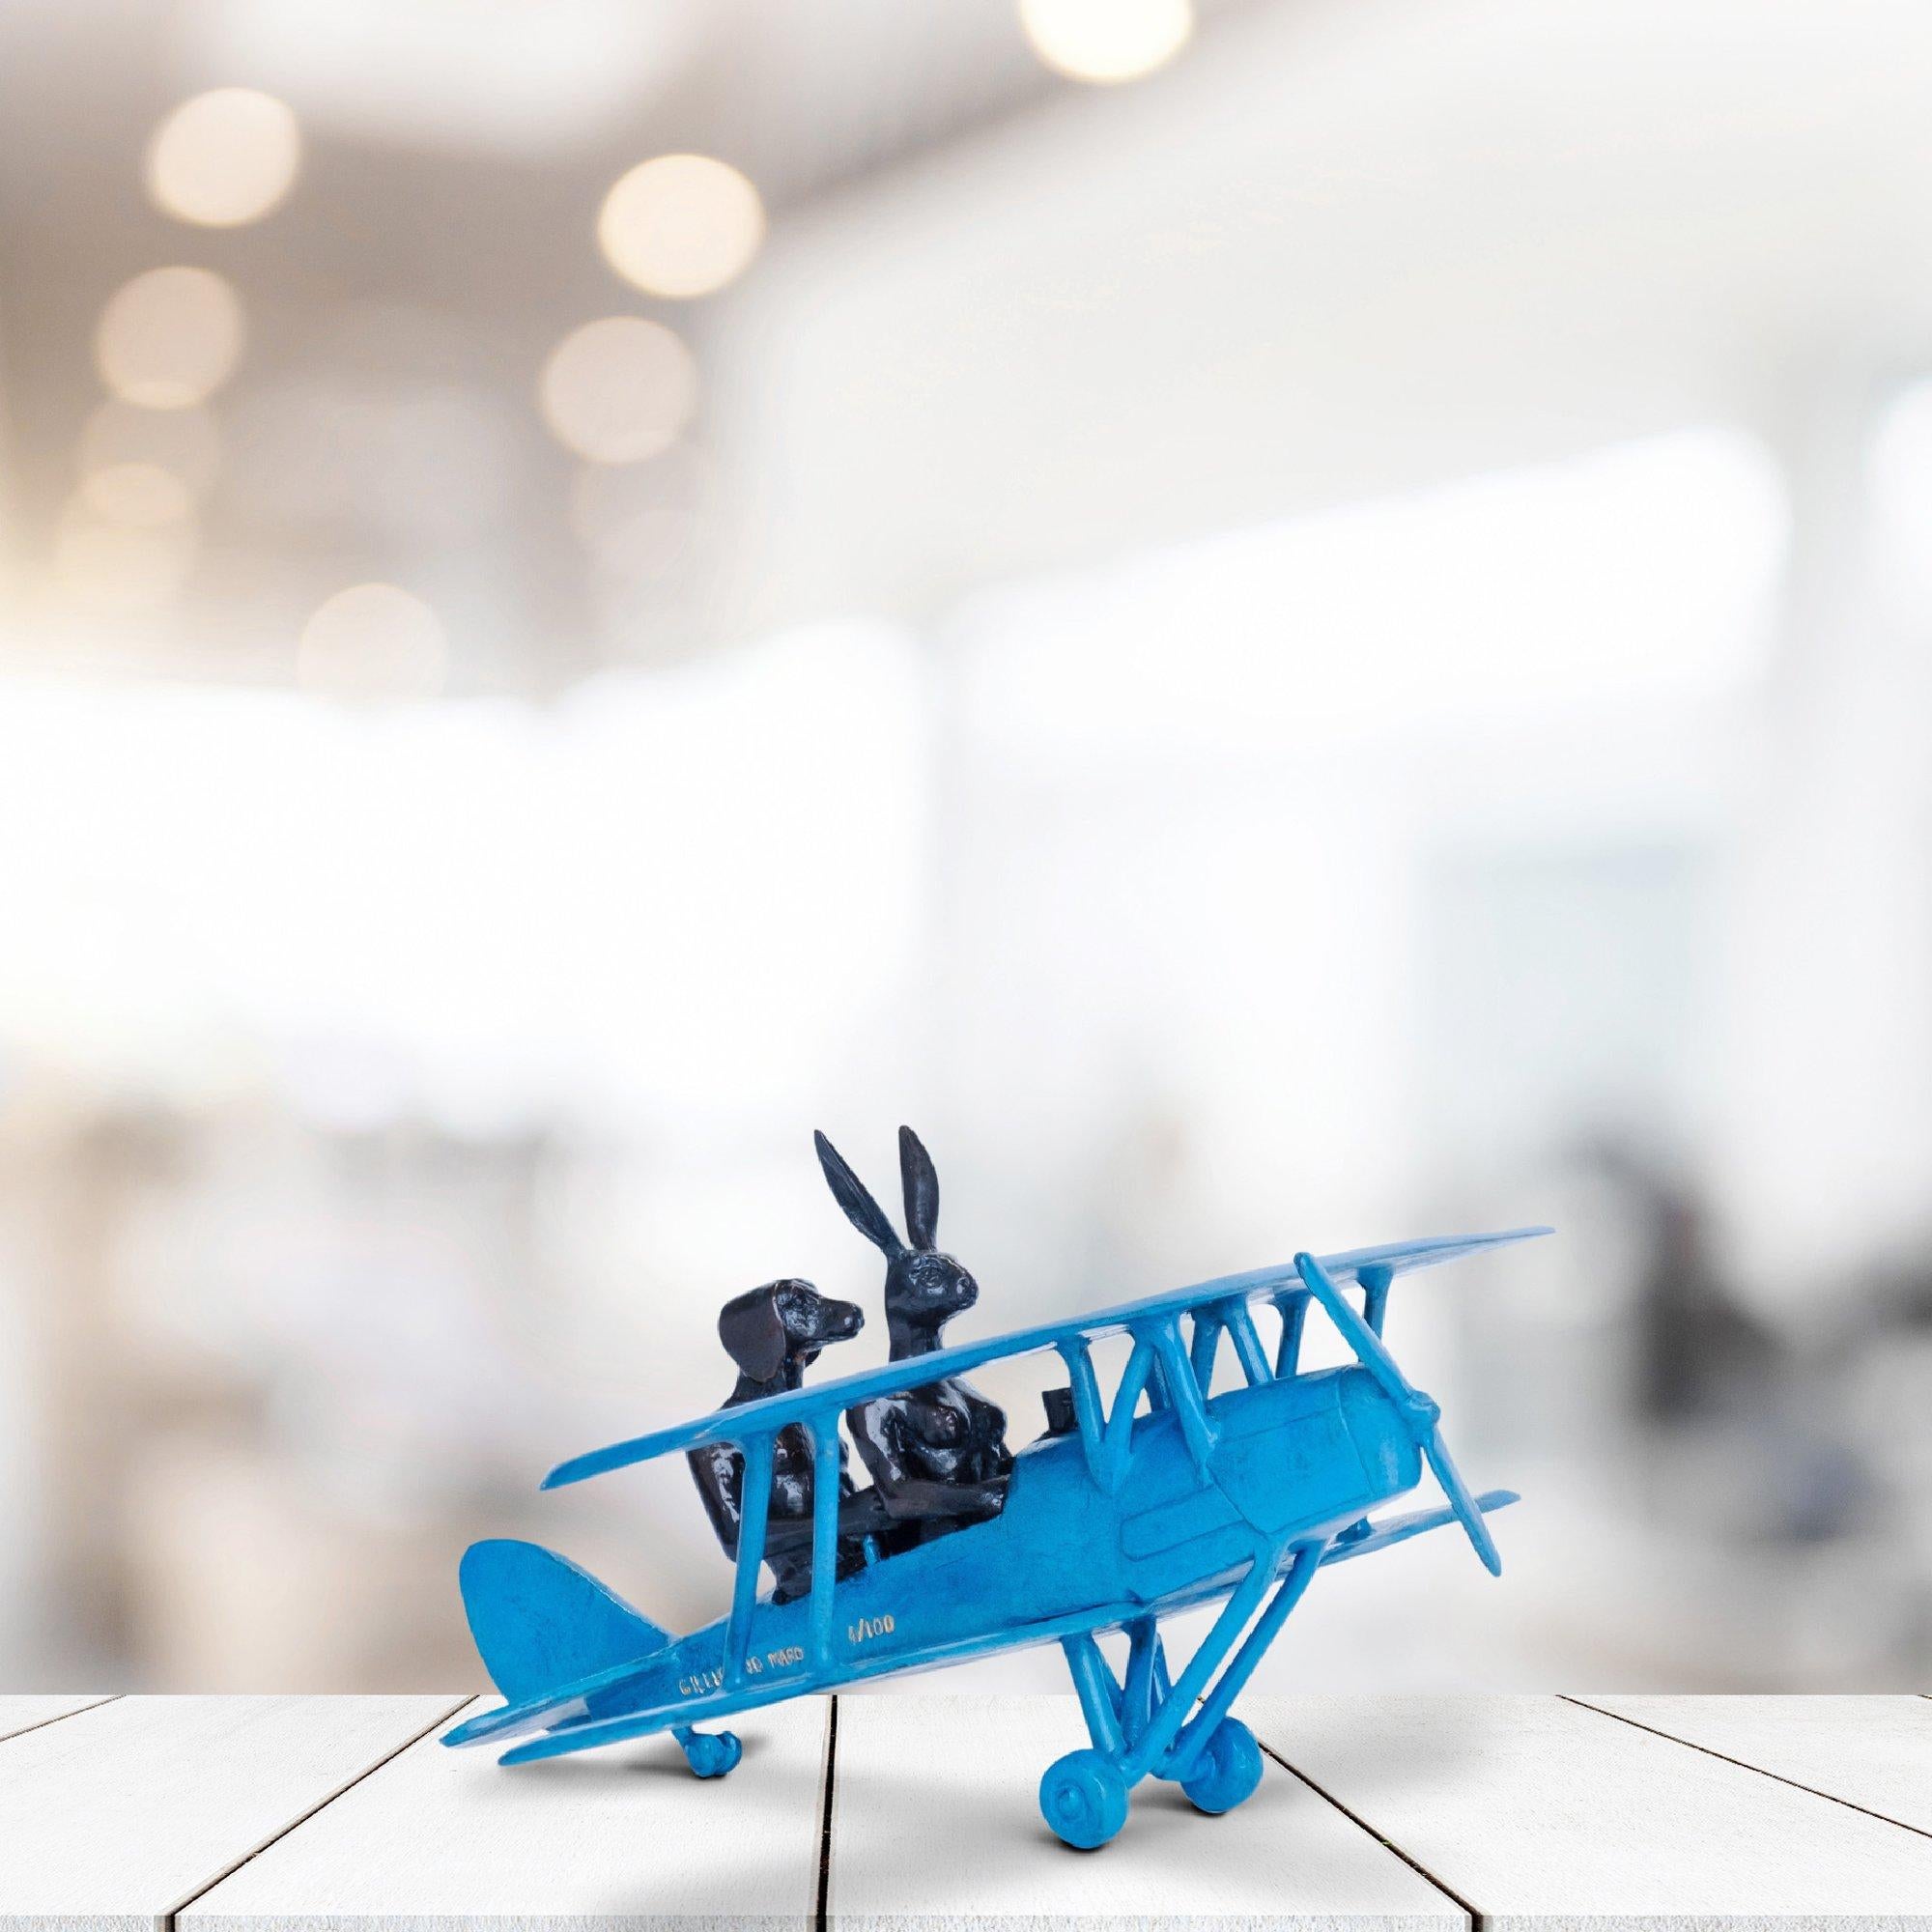 Title: They were flying high (Miniature Blue Tiger Moth Plane)
Authentic bronze sculpture
Limited Edition

World Famous Contemporary Artists: Husband and wife team, Gillie and Marc, are New York and Sydney-based contemporary artists who collaborate